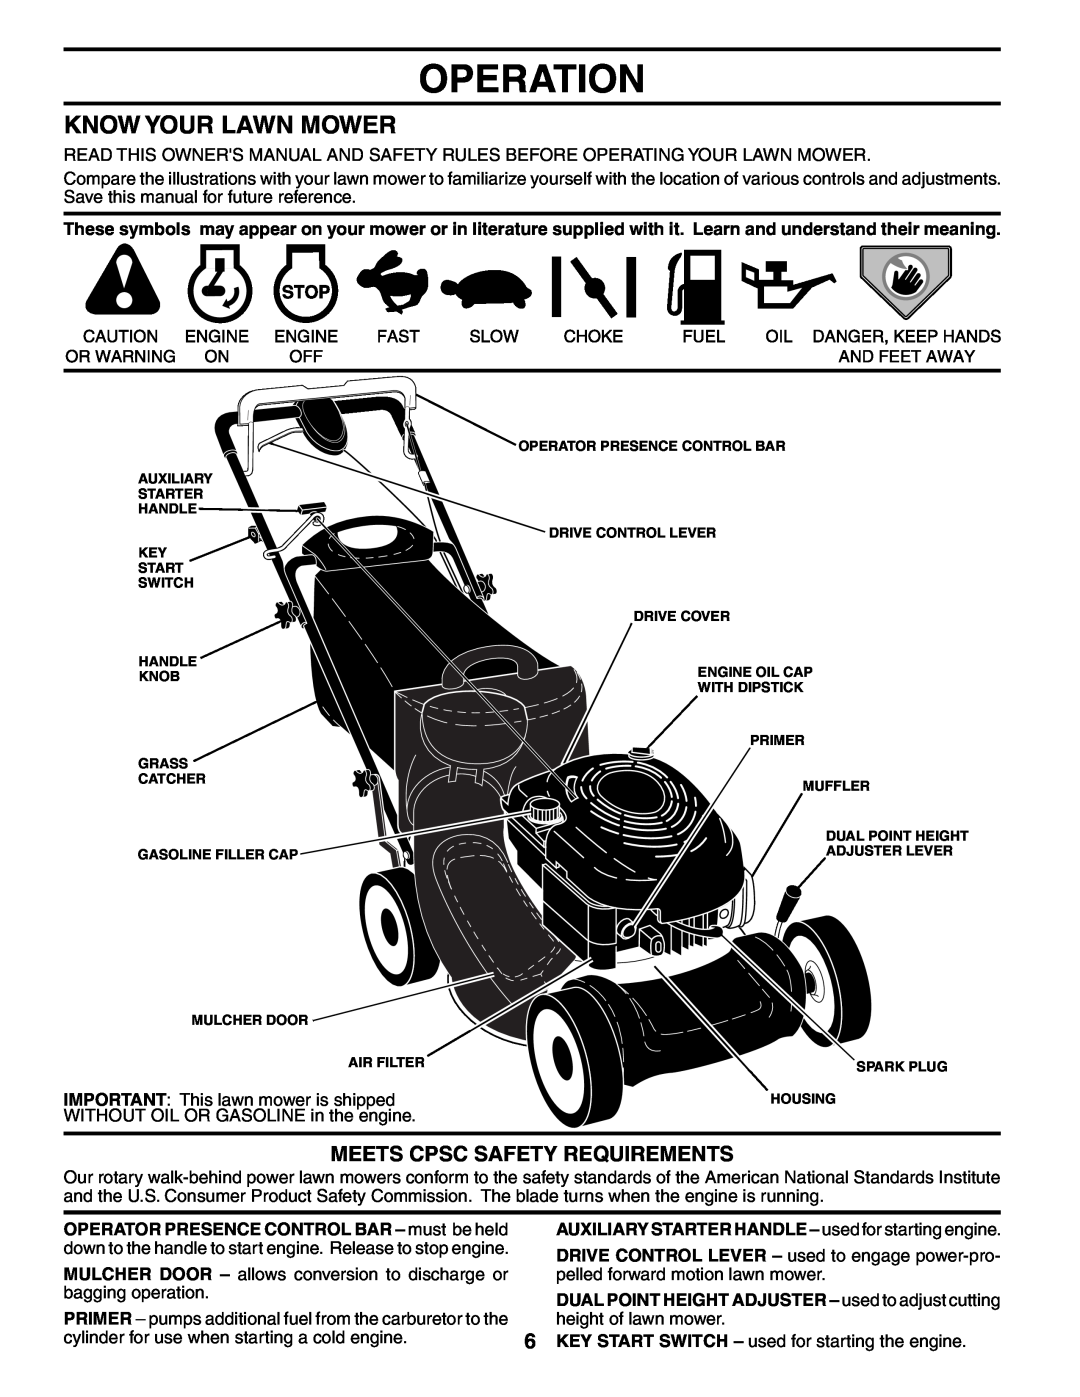 Husqvarna 917.37595 owner manual Operation, Know Your Lawn Mower, Meets Cpsc Safety Requirements 